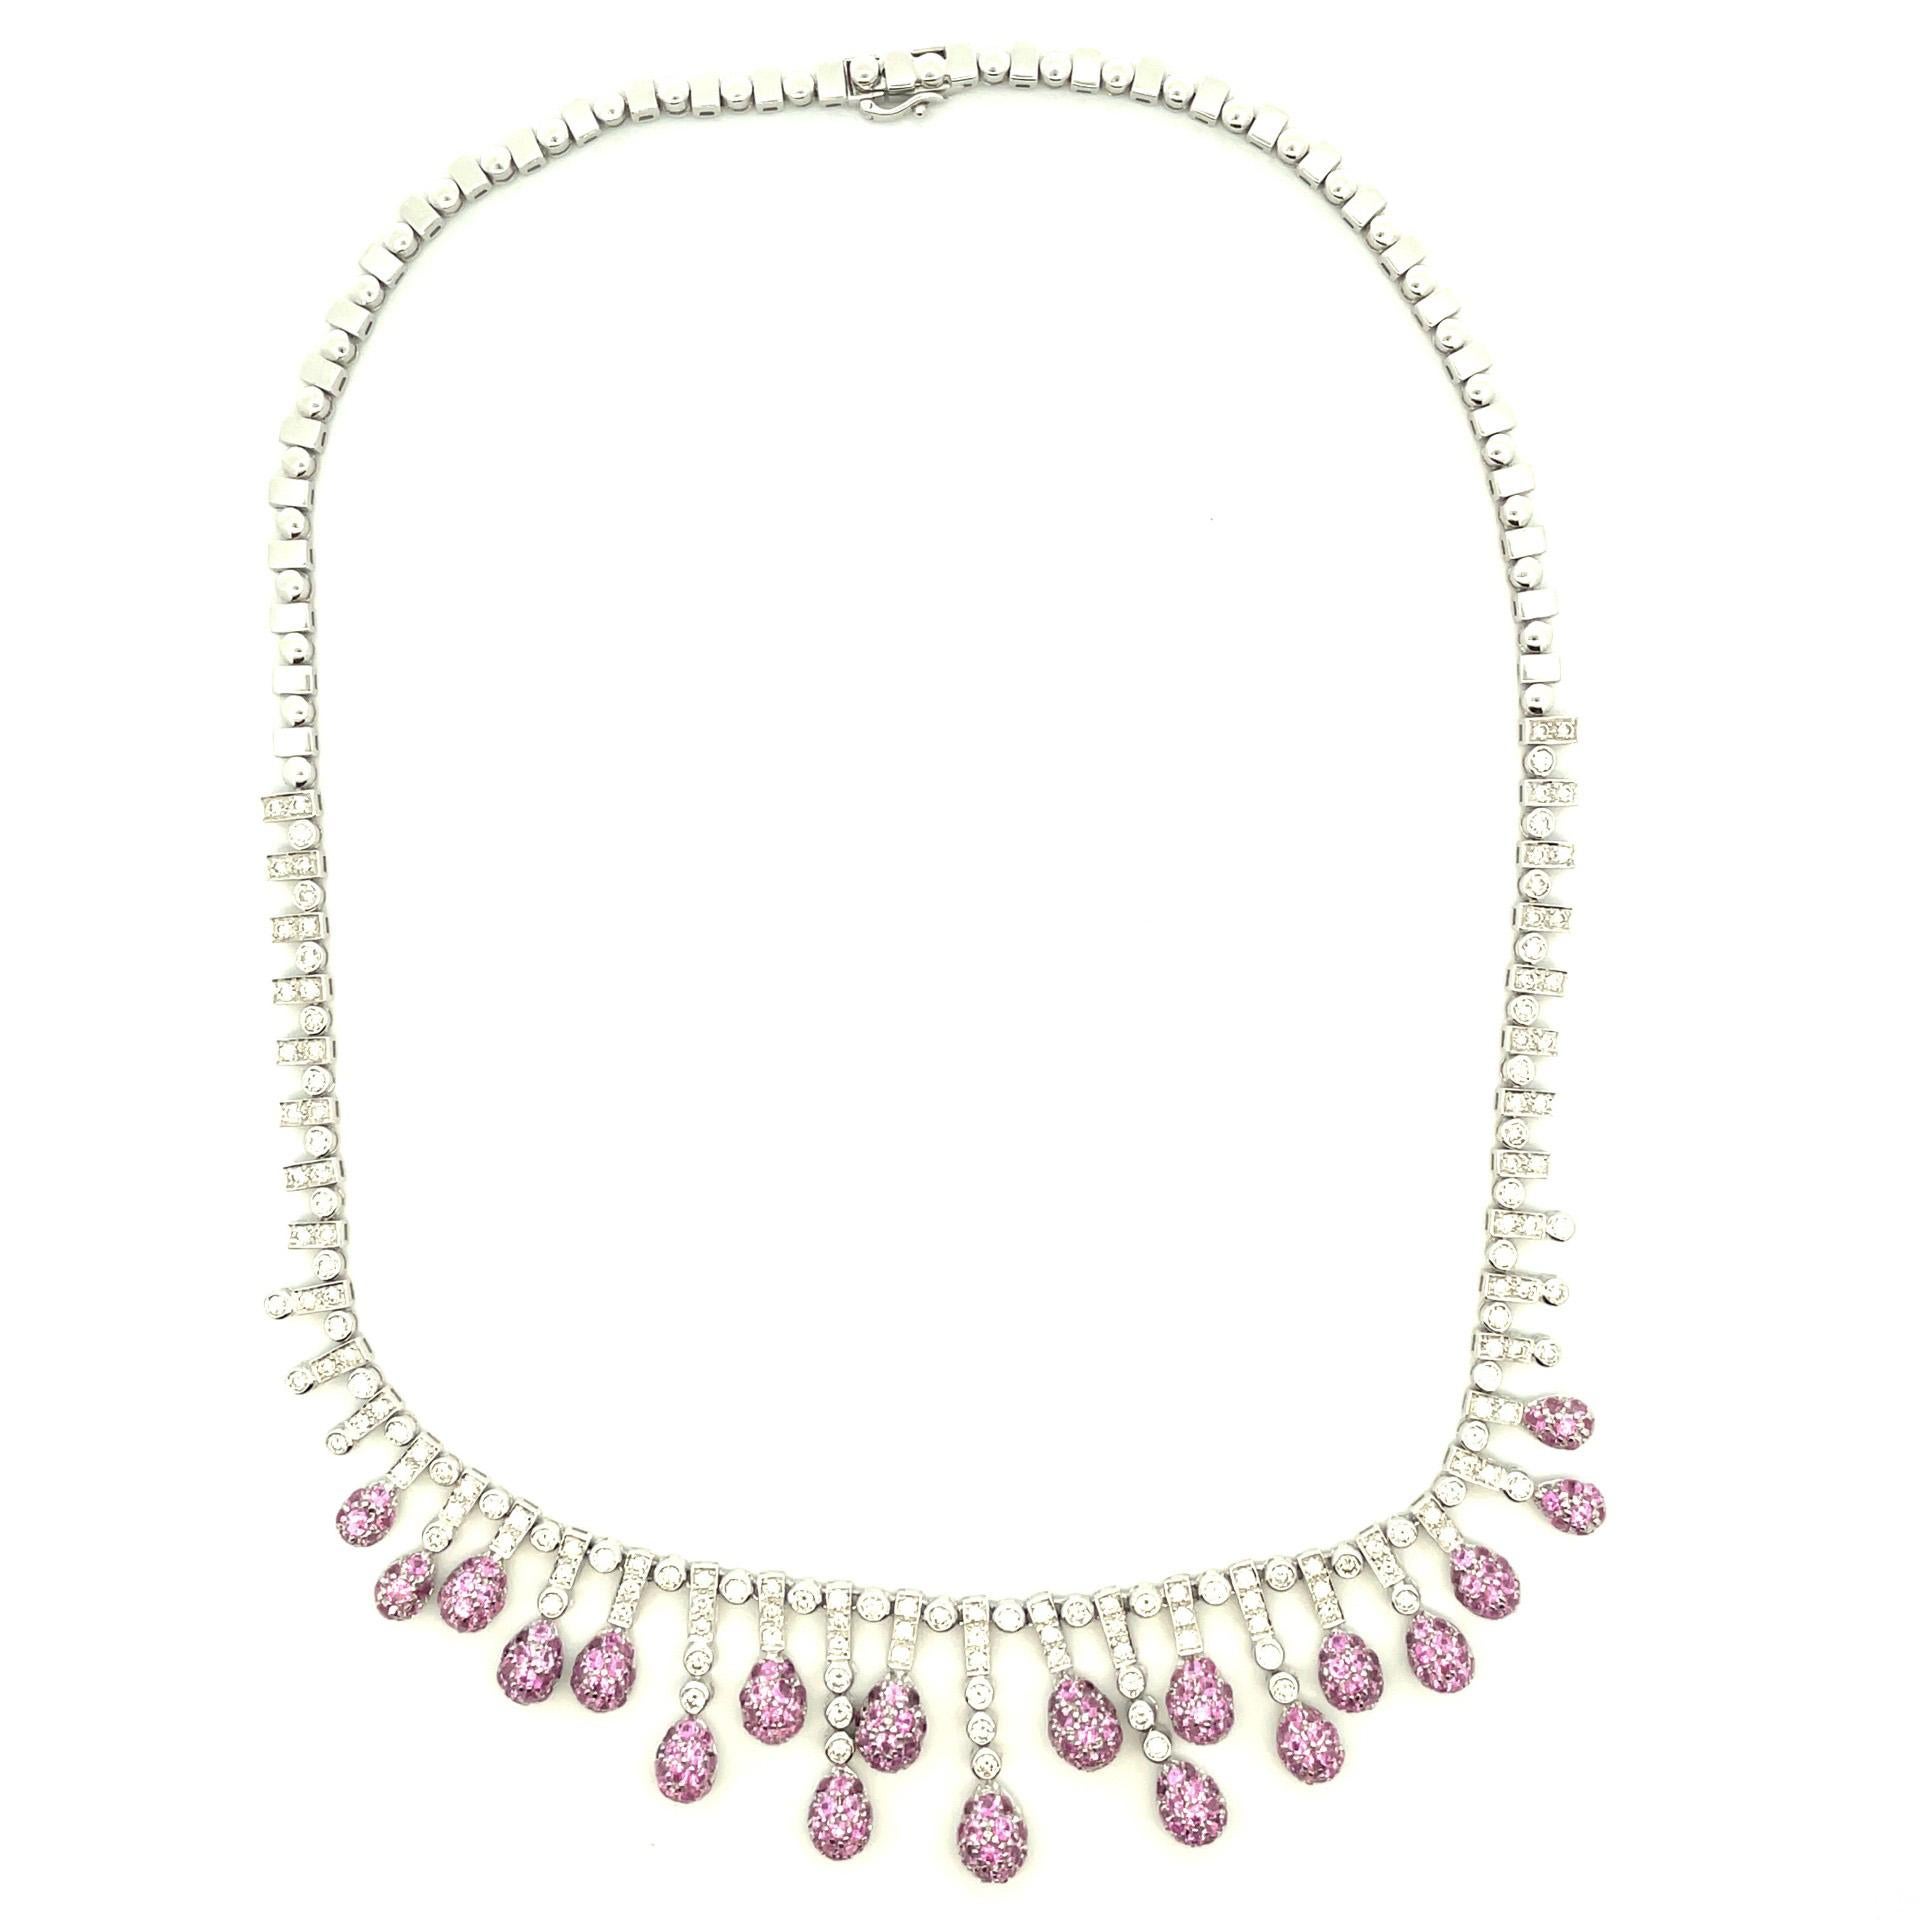 18kt white gold necklace with pink sapphires pave set in teardrops  and set with natural white diamonds. Lays in a beautiful bib style necklace.

156 brilliant cut natural white diamonds 3.73ct total weight

253 natural pink sapphires  6.63ct total